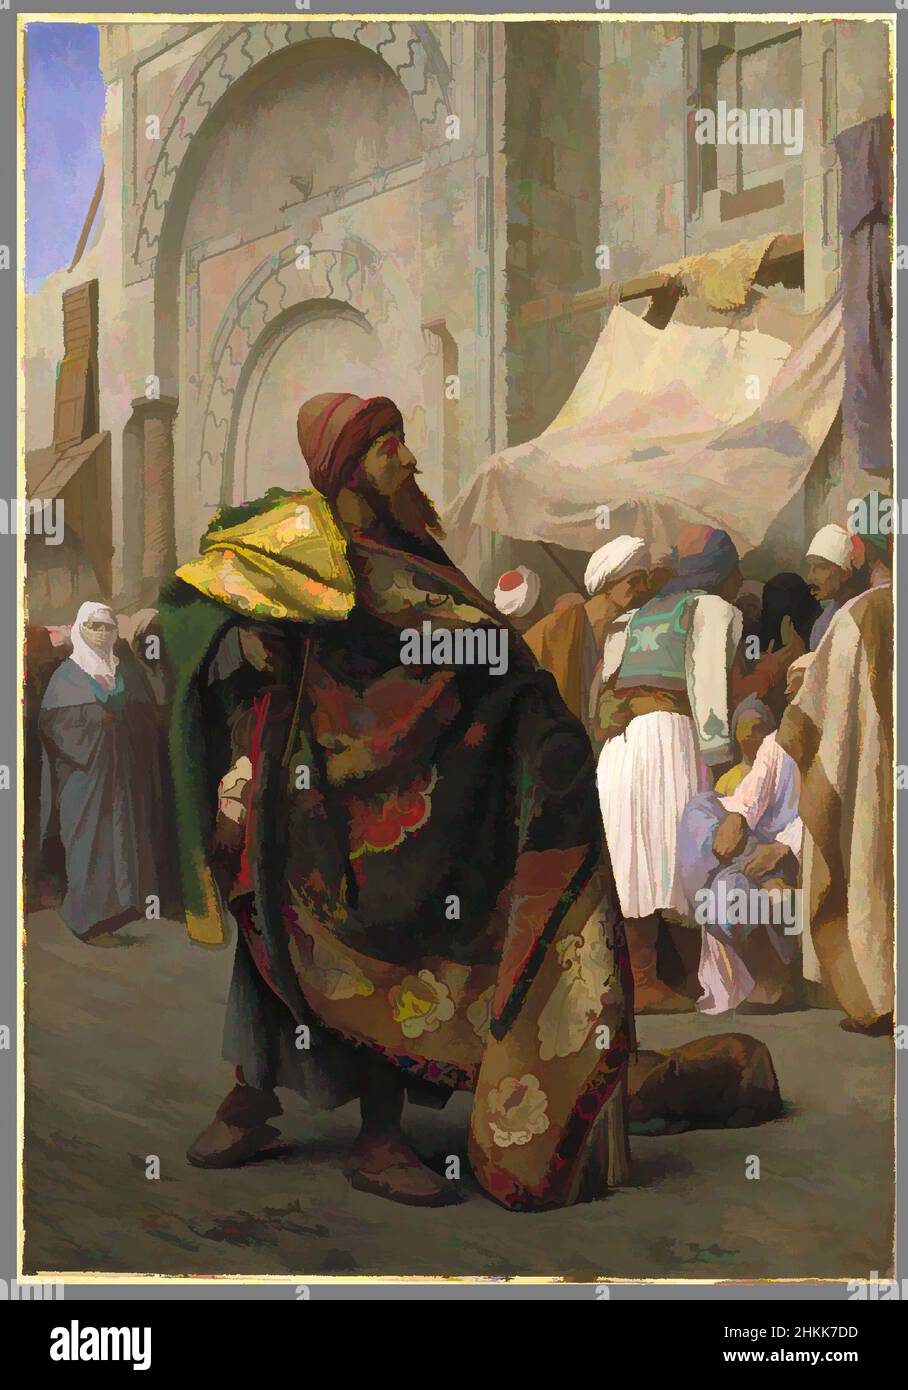 Art inspired by The Carpet Merchant of Cairo, Jean-Léon Gérôme, French, 1824-1904, Oil on canvas, Europe, 1869, 31 7/8 x 22 in., 81 x 55.9 cm, Academicism style, Arab, bazzar, beard, Cairo, carpet, city, cityscape, commerce, discussion, east, Egypt, Egyptian, European, French, French, Classic works modernized by Artotop with a splash of modernity. Shapes, color and value, eye-catching visual impact on art. Emotions through freedom of artworks in a contemporary way. A timeless message pursuing a wildly creative new direction. Artists turning to the digital medium and creating the Artotop NFT Stock Photo